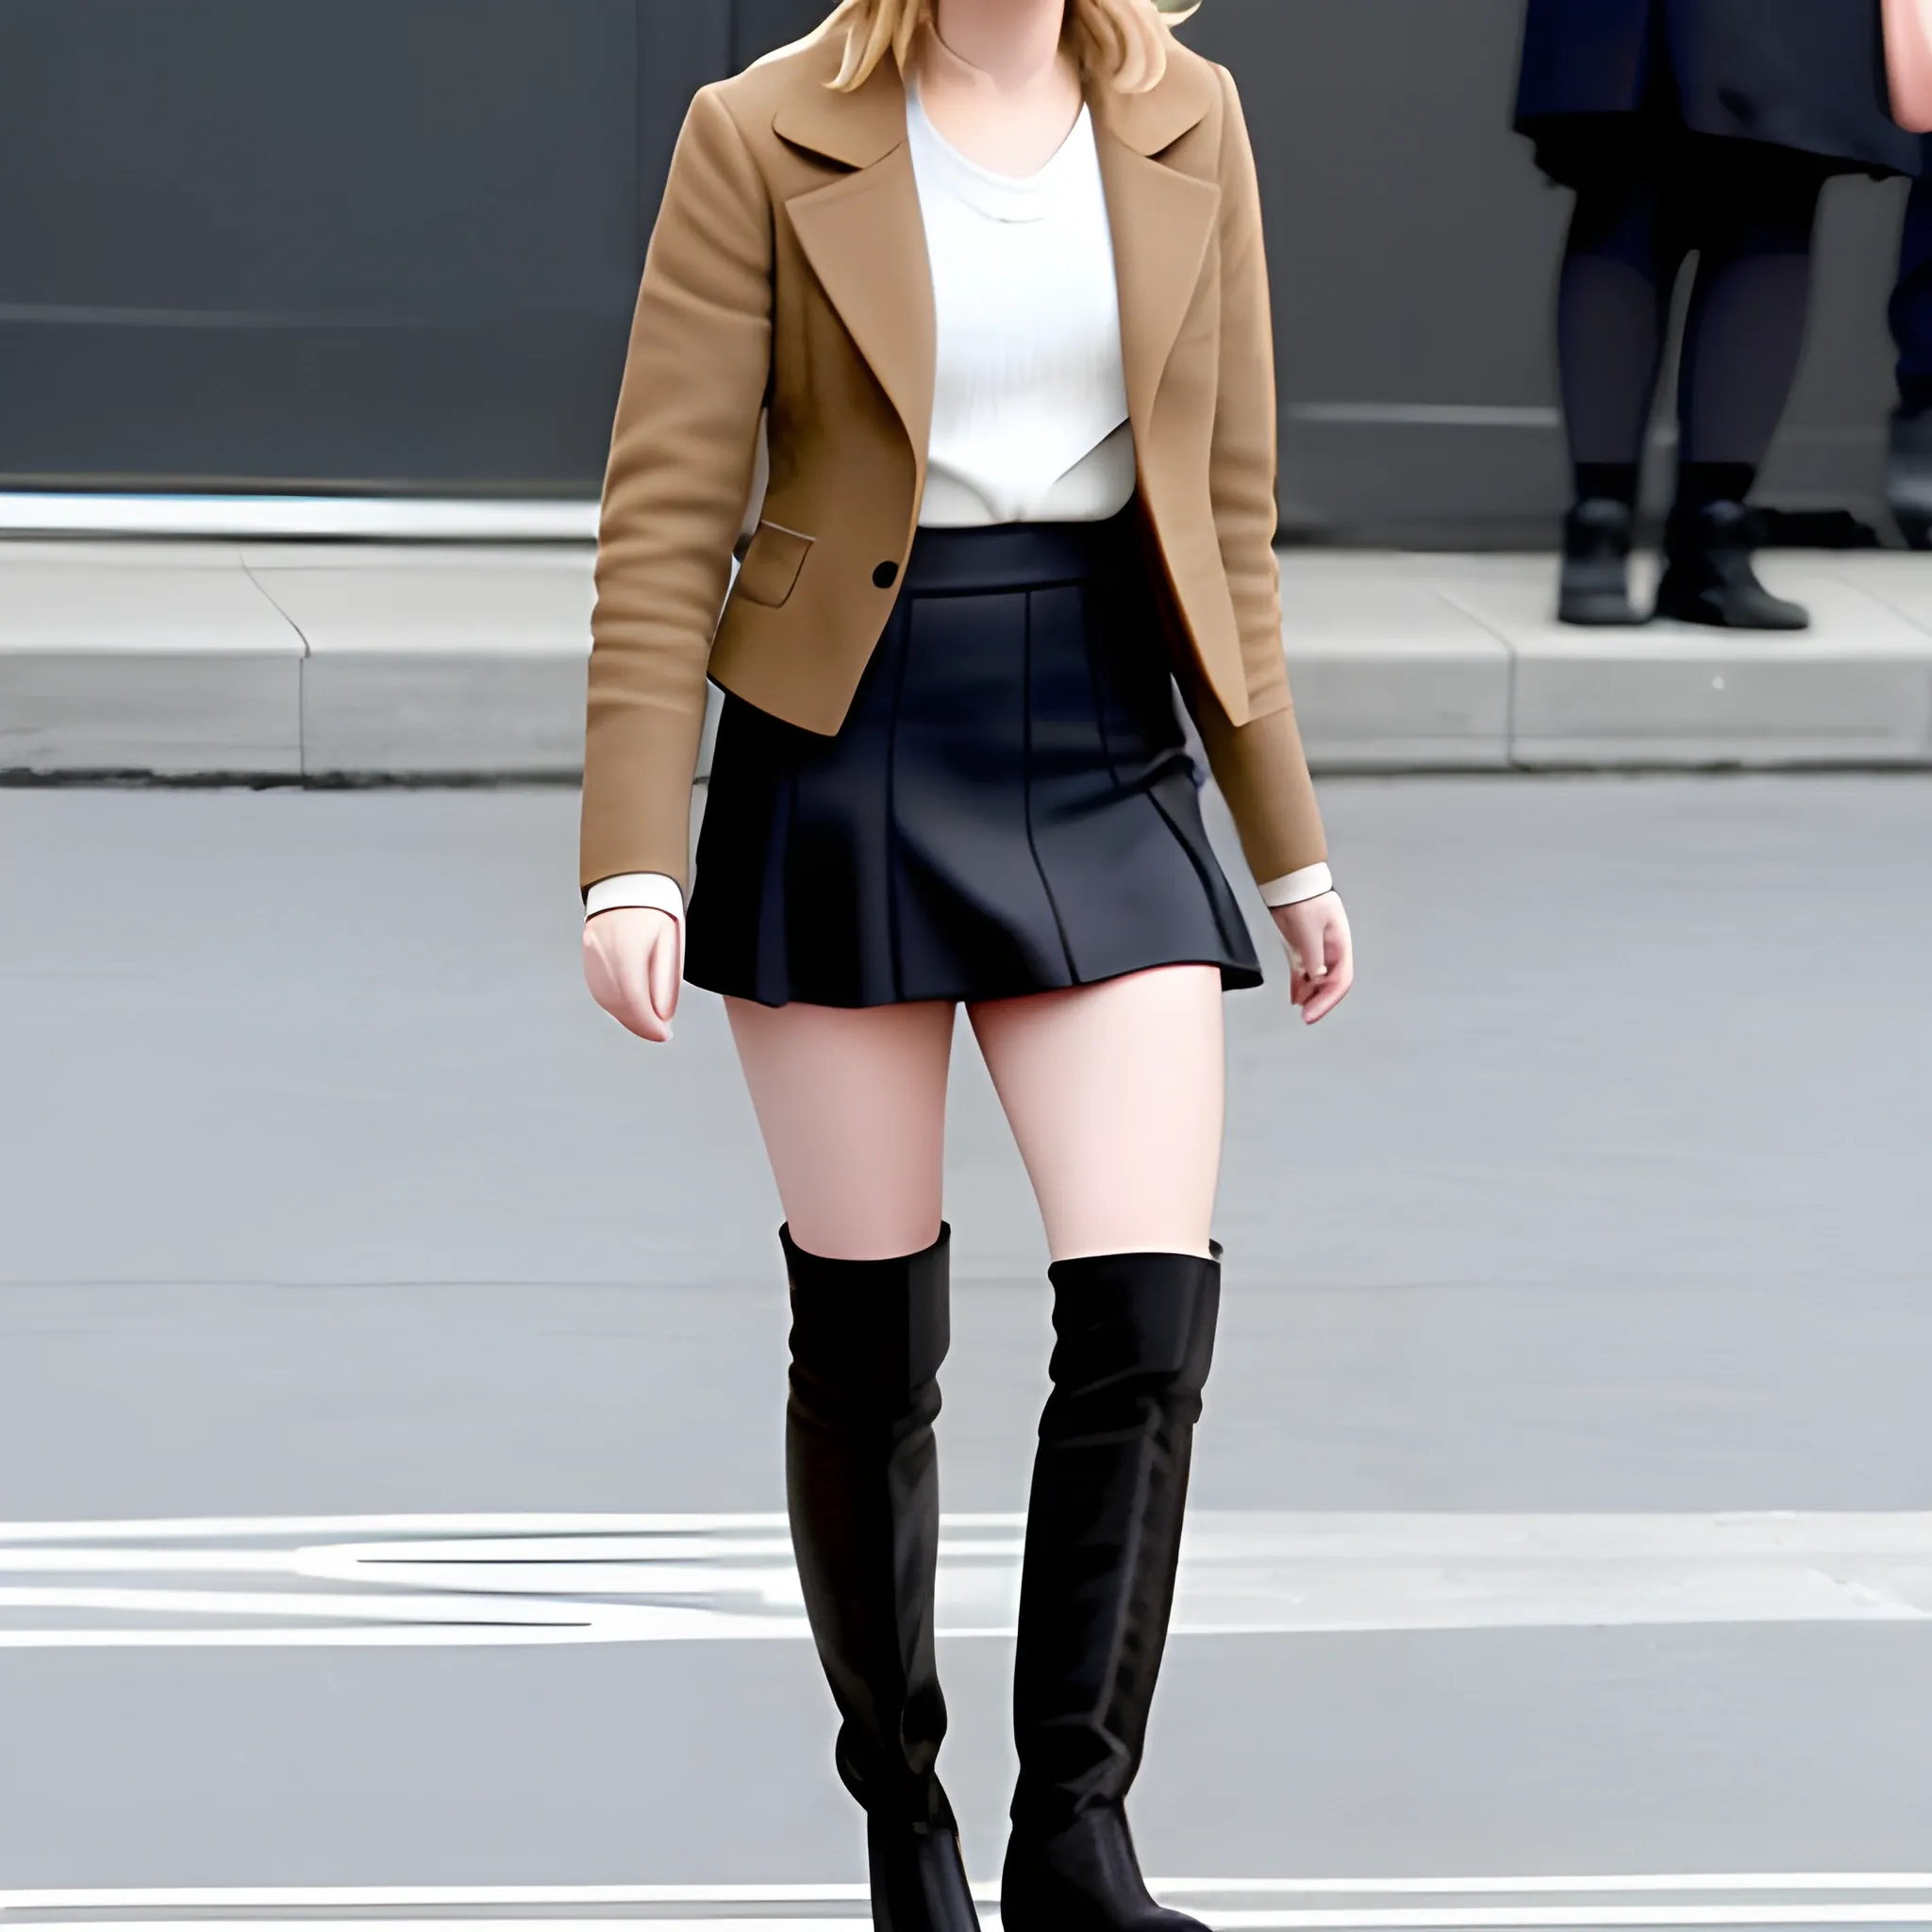 andrew santiago recommends emma watson mini skirt pic